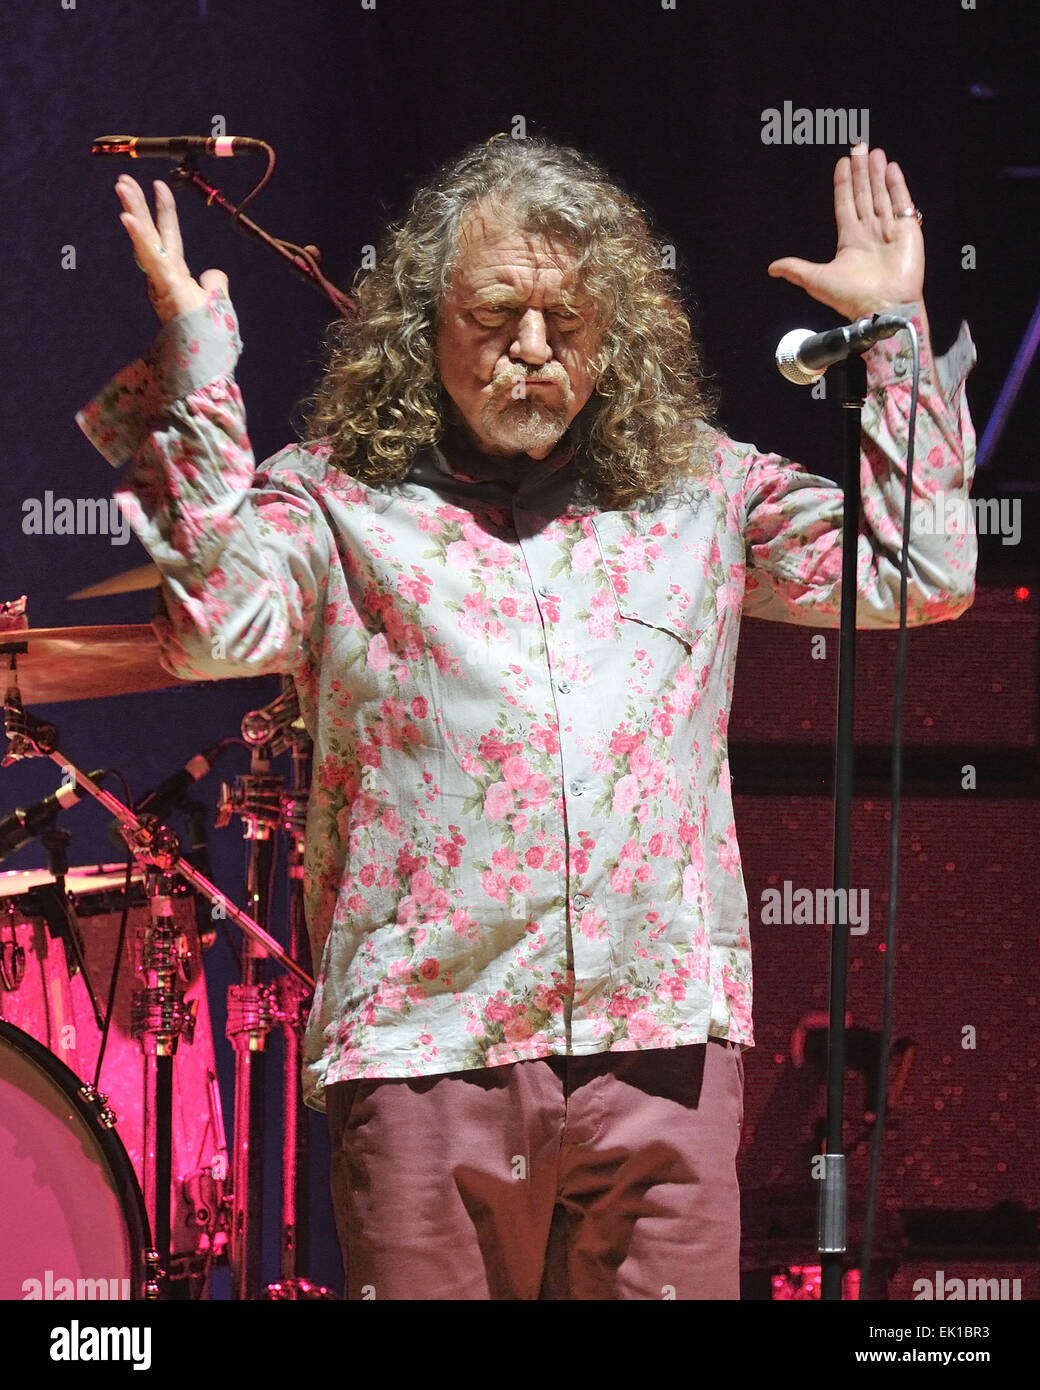 Robert Plant And The Sensational Space Shifters perform at Massey Hall. Featuring: Robert Plant Where: New York City, United States When: 30 Sep 2014 Stock Photo